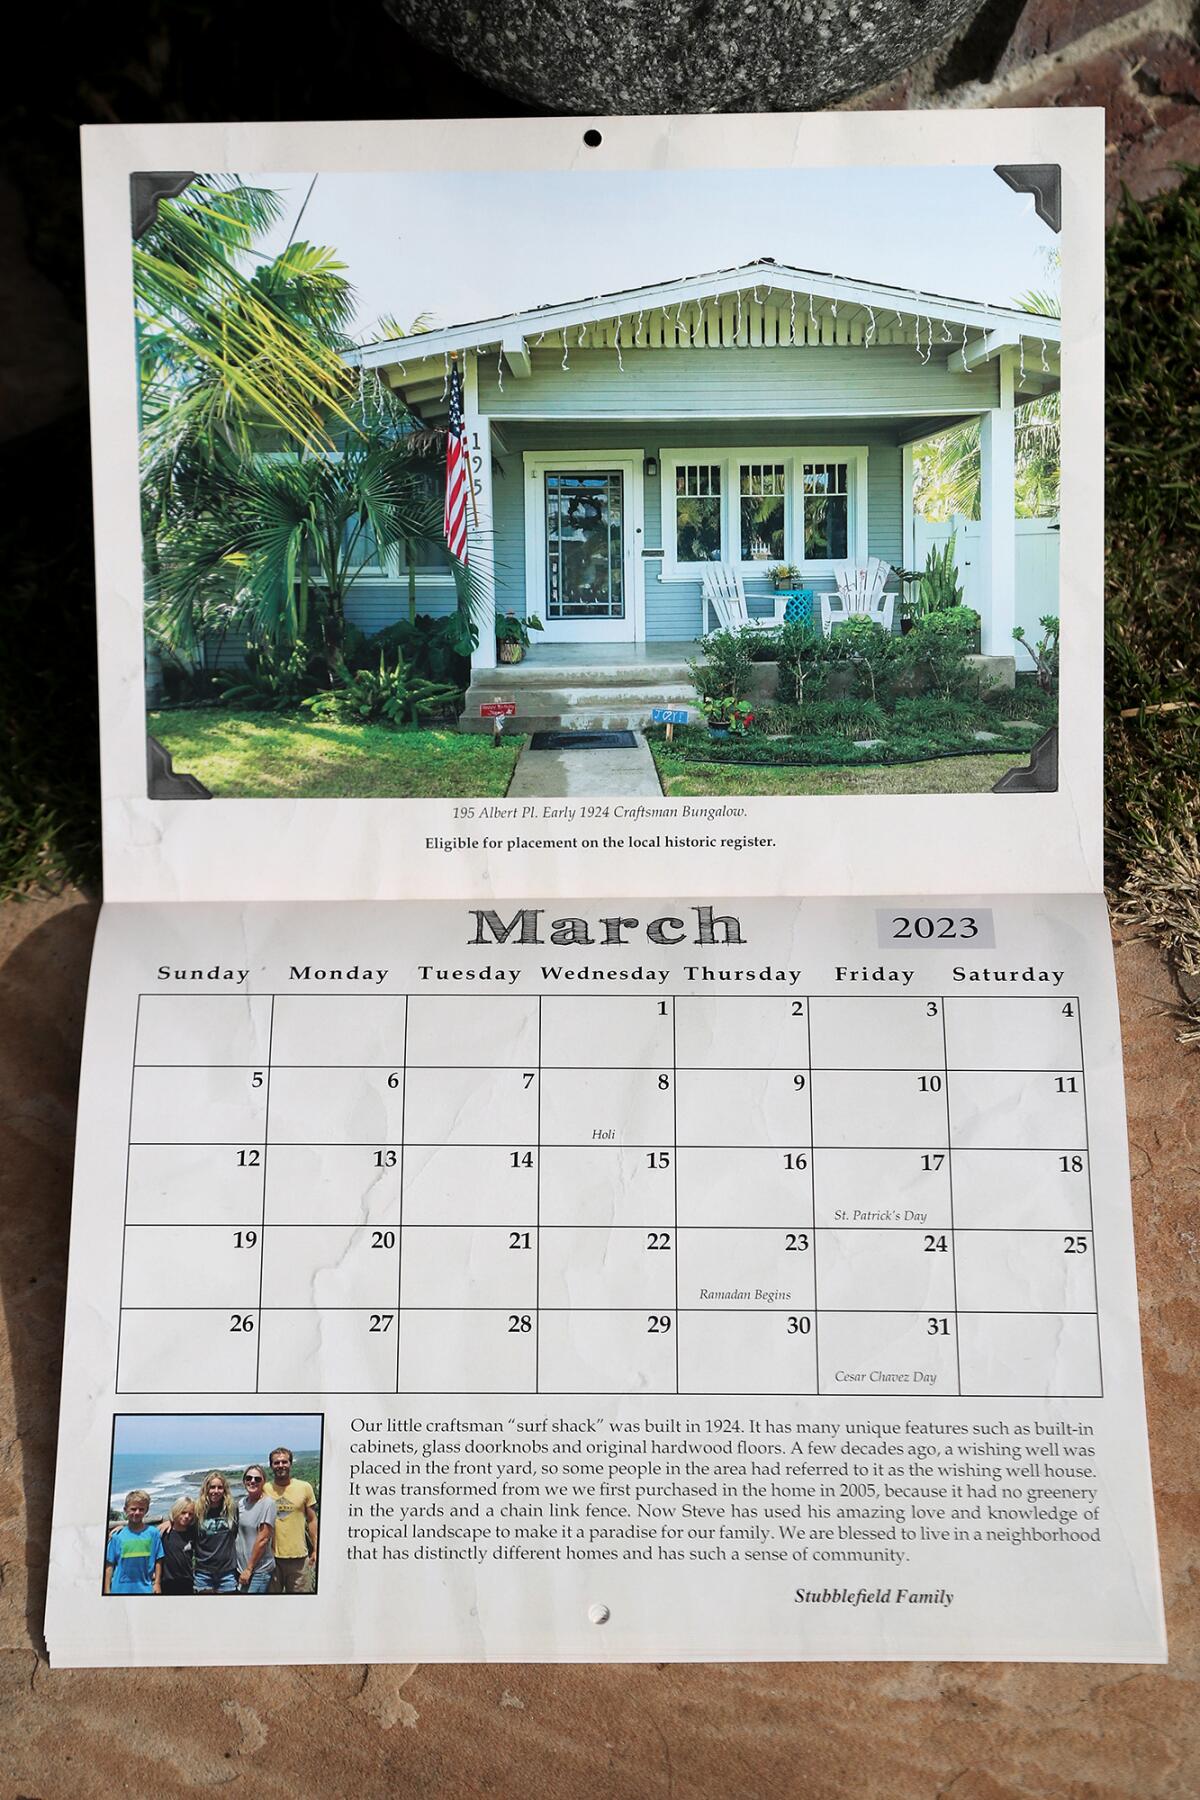 "Historic Properties of Costa Mesa" features homes that qualify for inclusion in a Local Register of Historic Places.